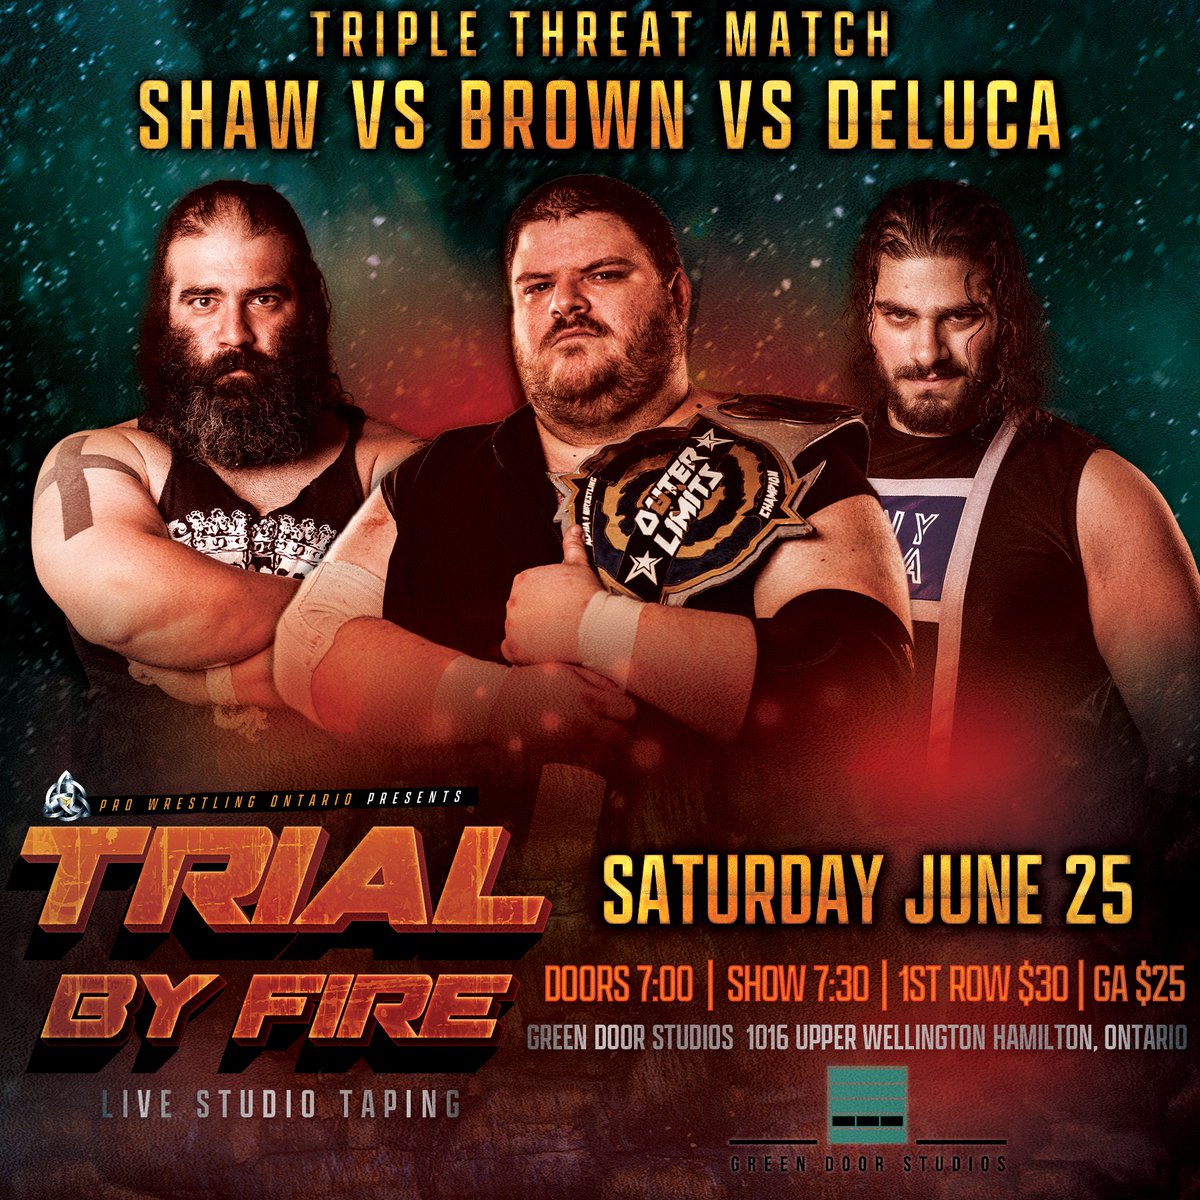 Get Ready For A Fight!

@GrinderMarkShaw  @renownedbrown & @jonny_deluca are no stranger to one another. All three have competed in The #IronCupTournament as well as the #TriosDivision within #PWO & on June 25th at #TrialByFire they will meet in a #TripleThreatMatch!

#PWOisBACK